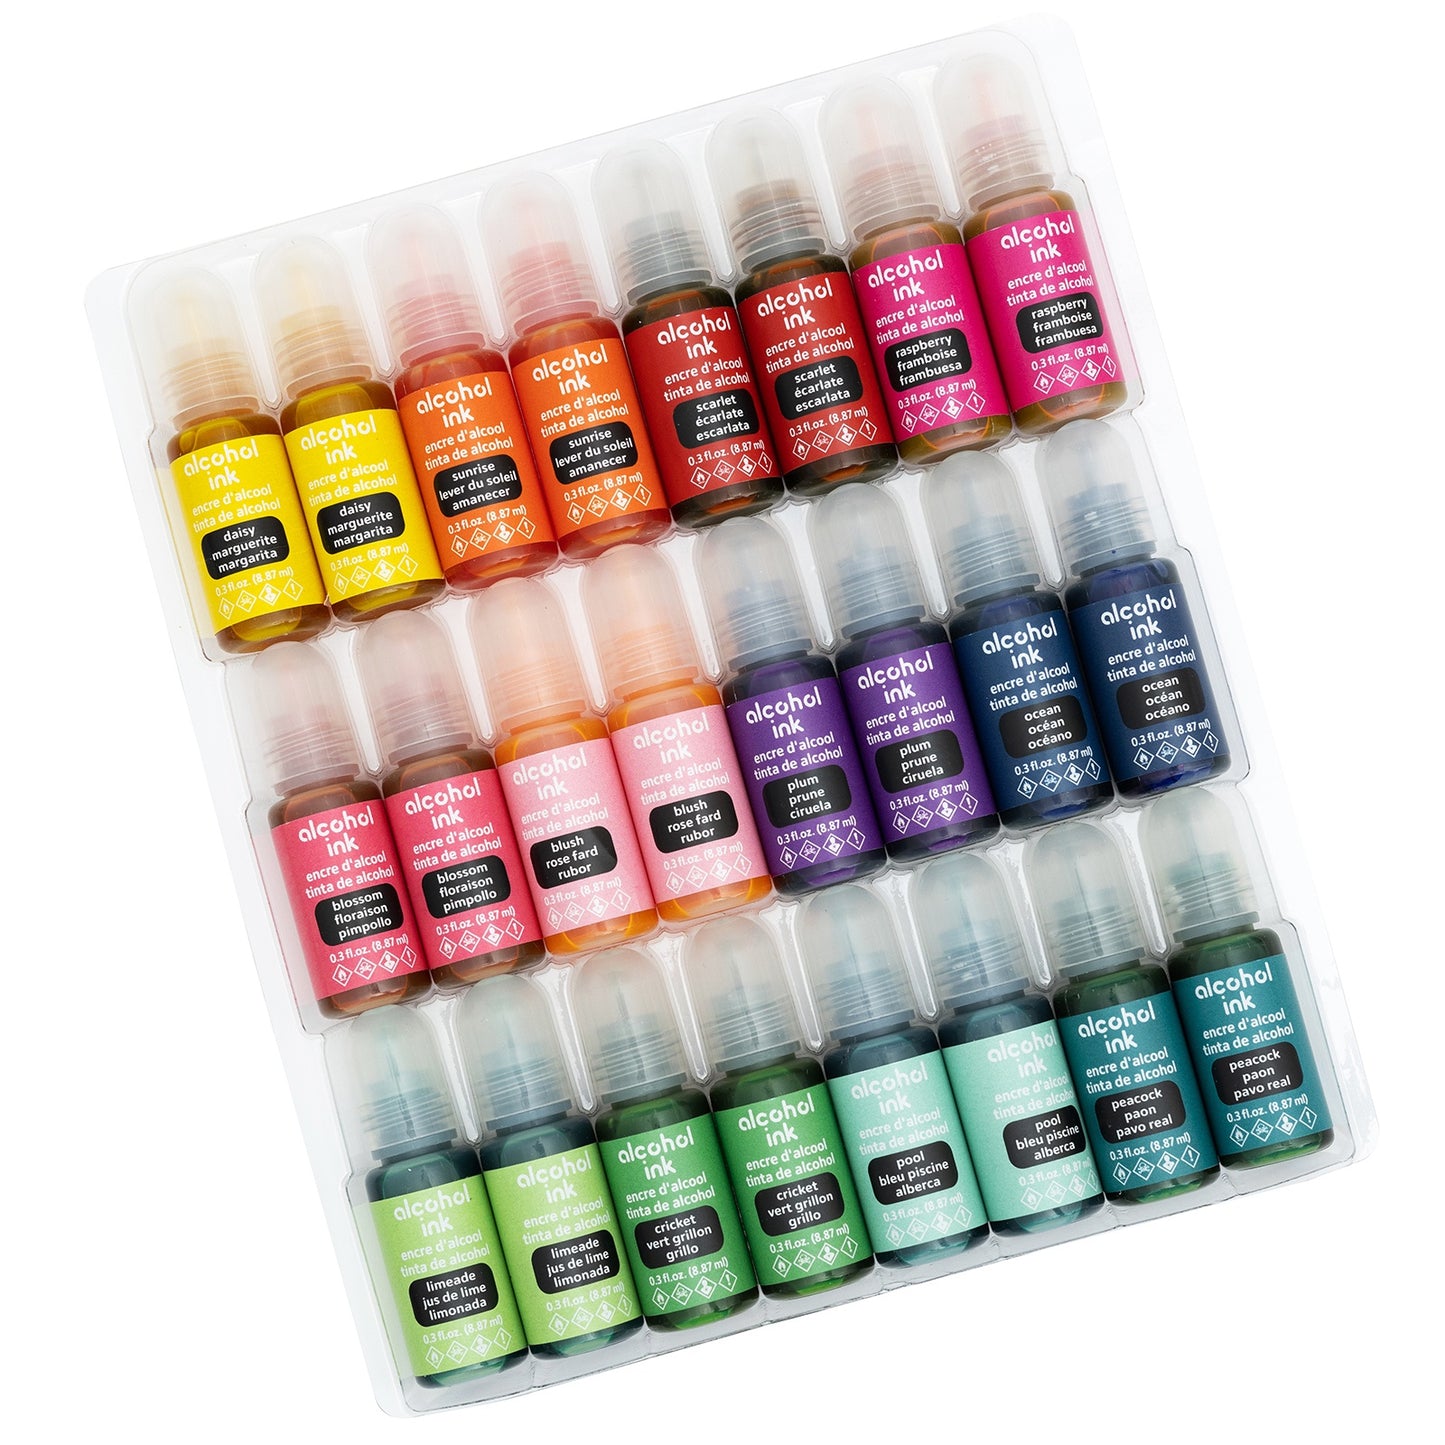 American Crafts Alcohol Ink 0.3oz 24/Pkg-Two each of 12 assorted colors